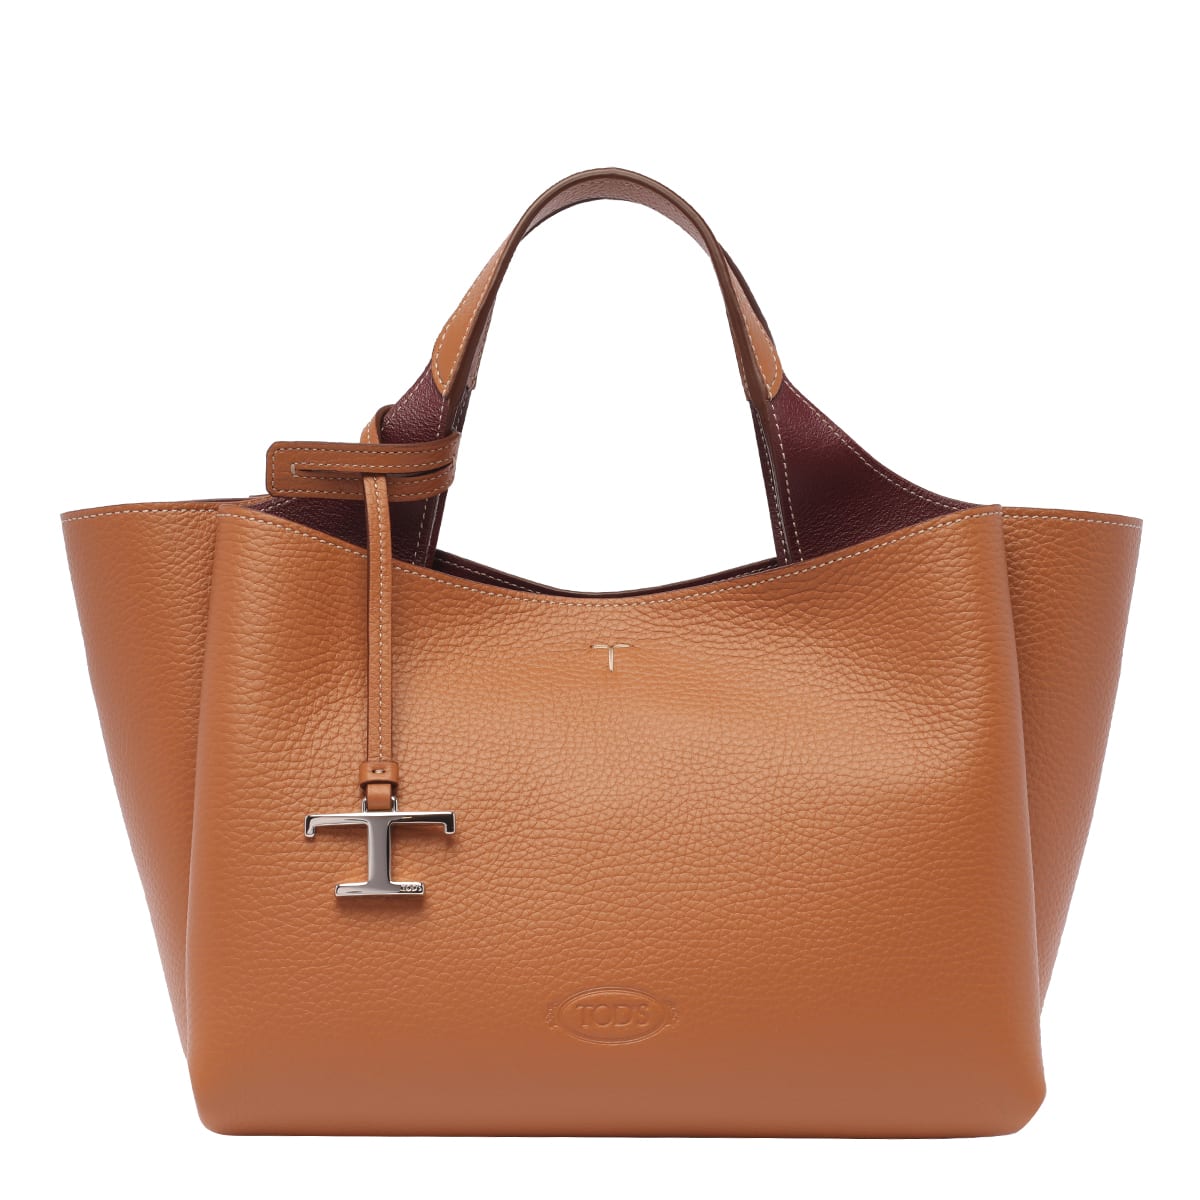 TOD'S Boston small leather shoulder bag